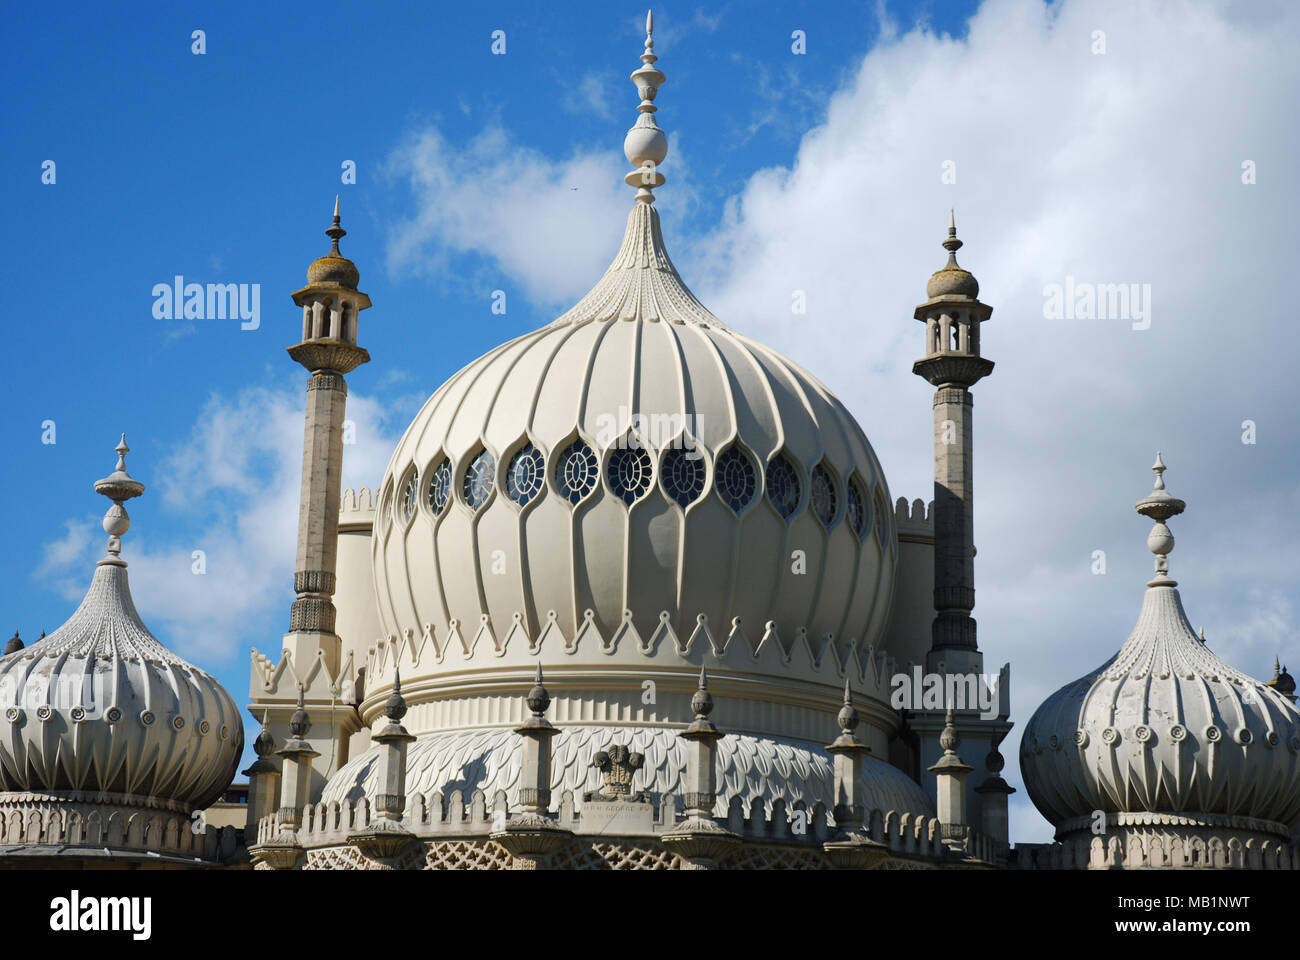 Brighton Pavilion closer view of the domes, minarets and towers Stock Photo